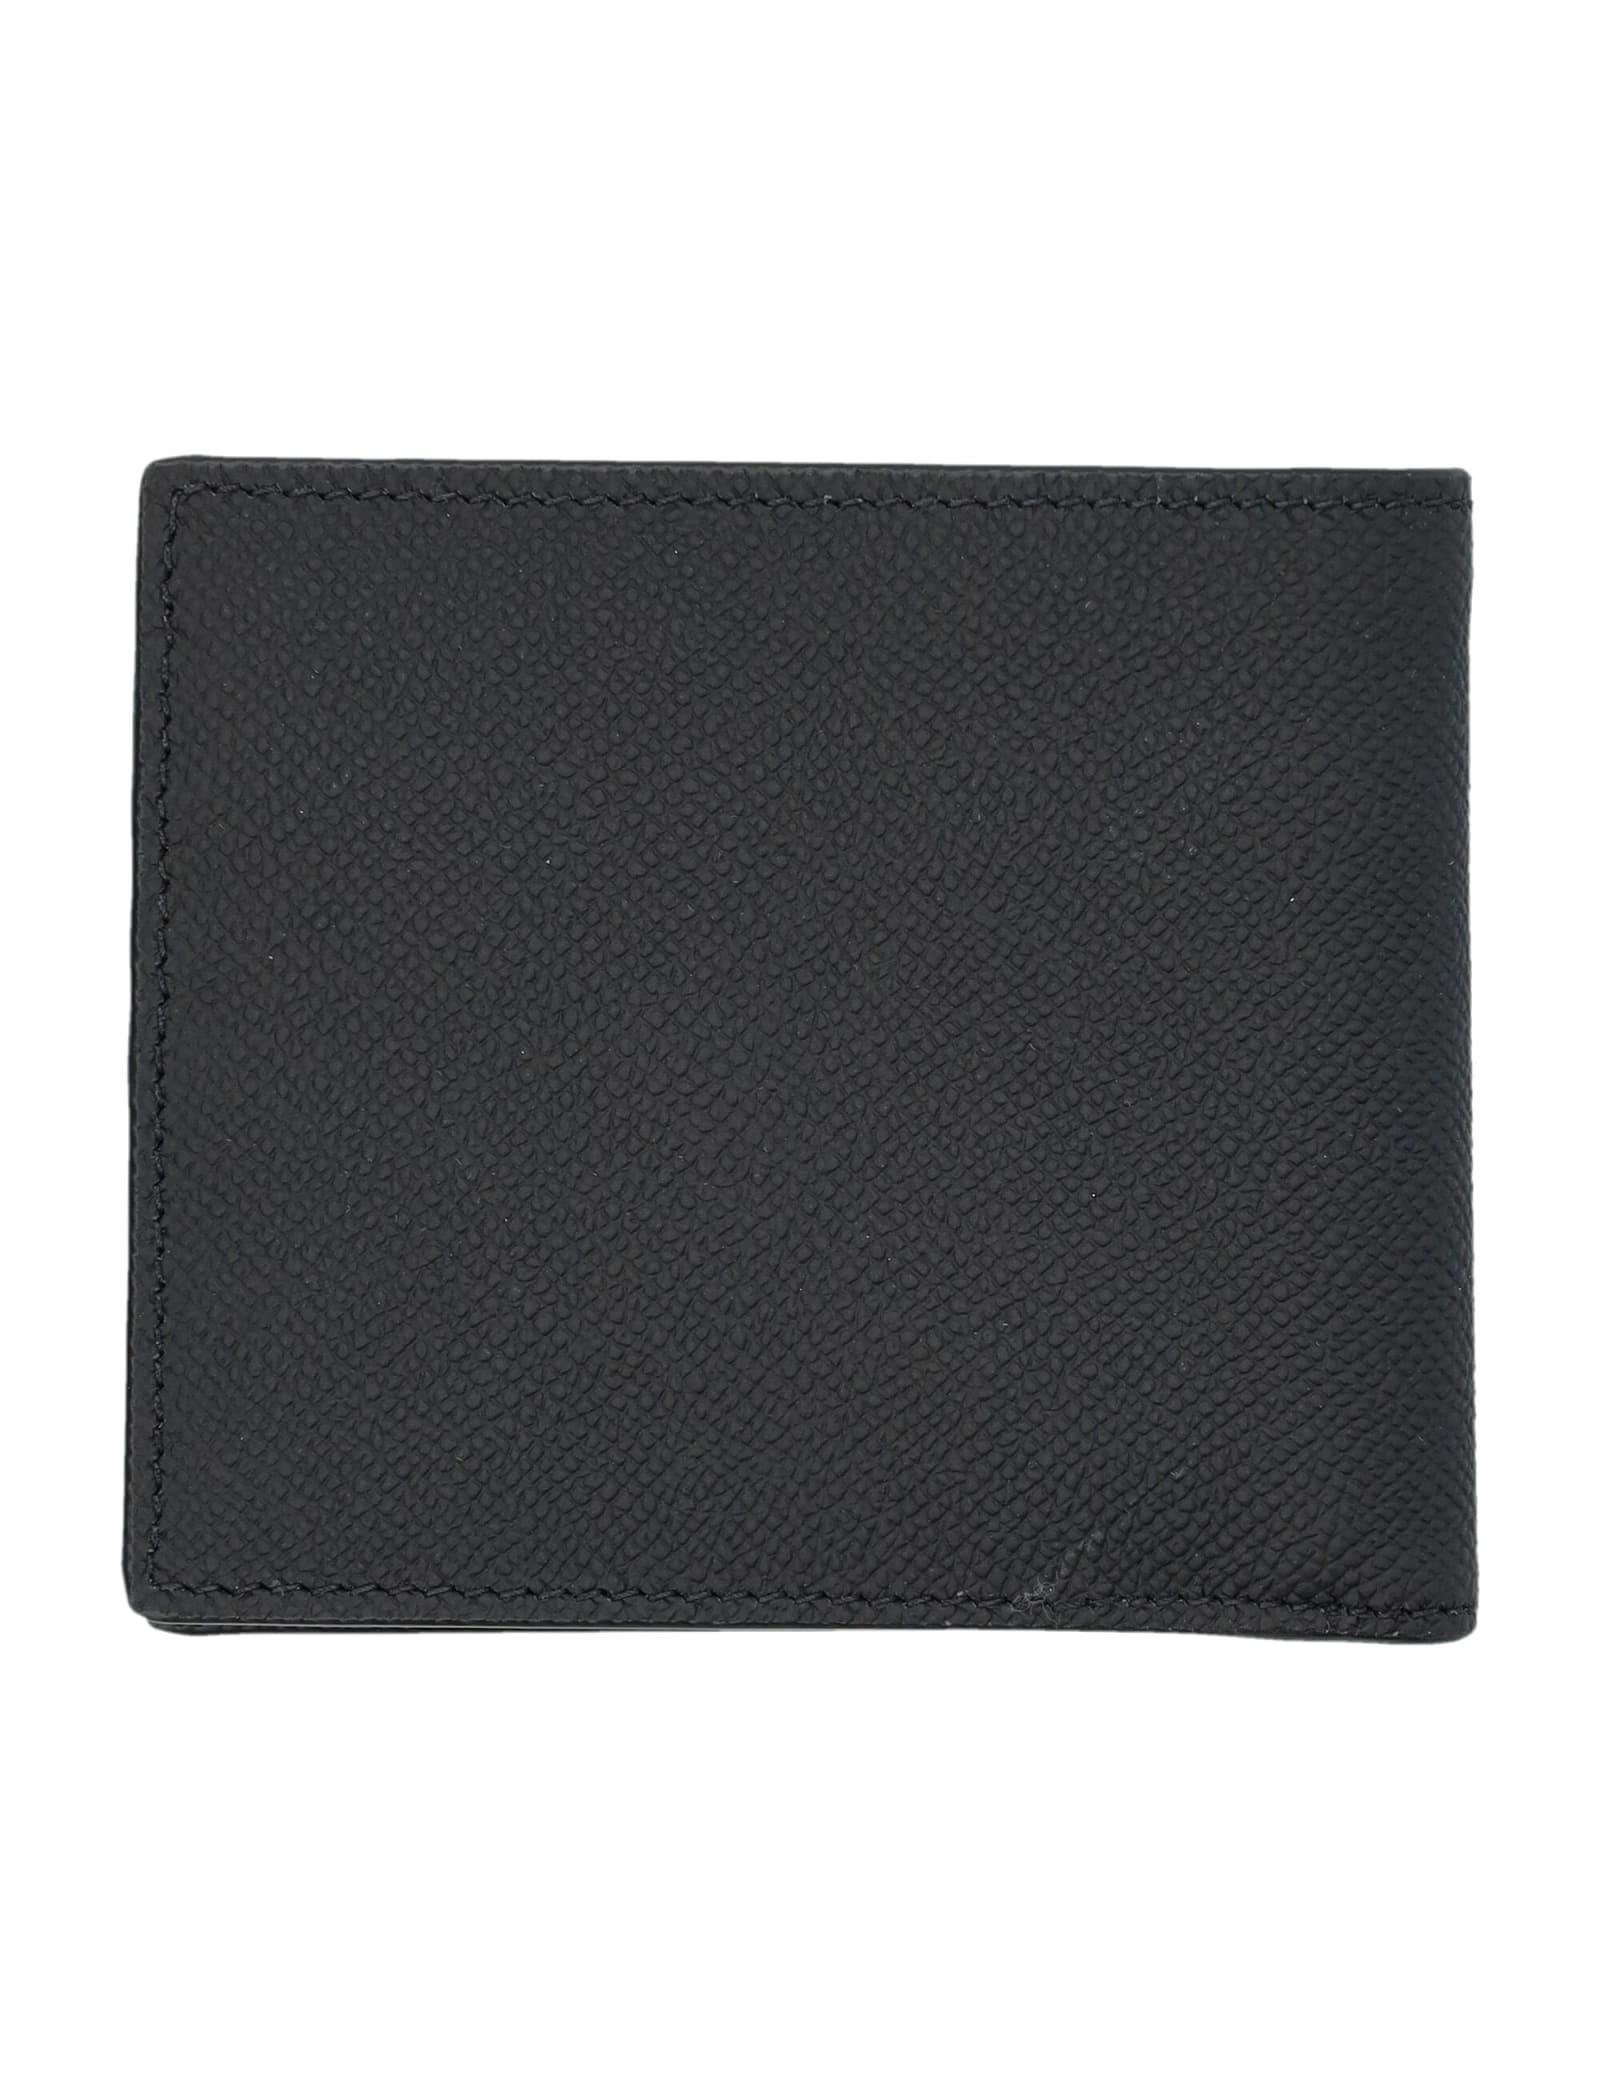 Burberry Grainy Leather Tb Bifold Wallet In Black/black